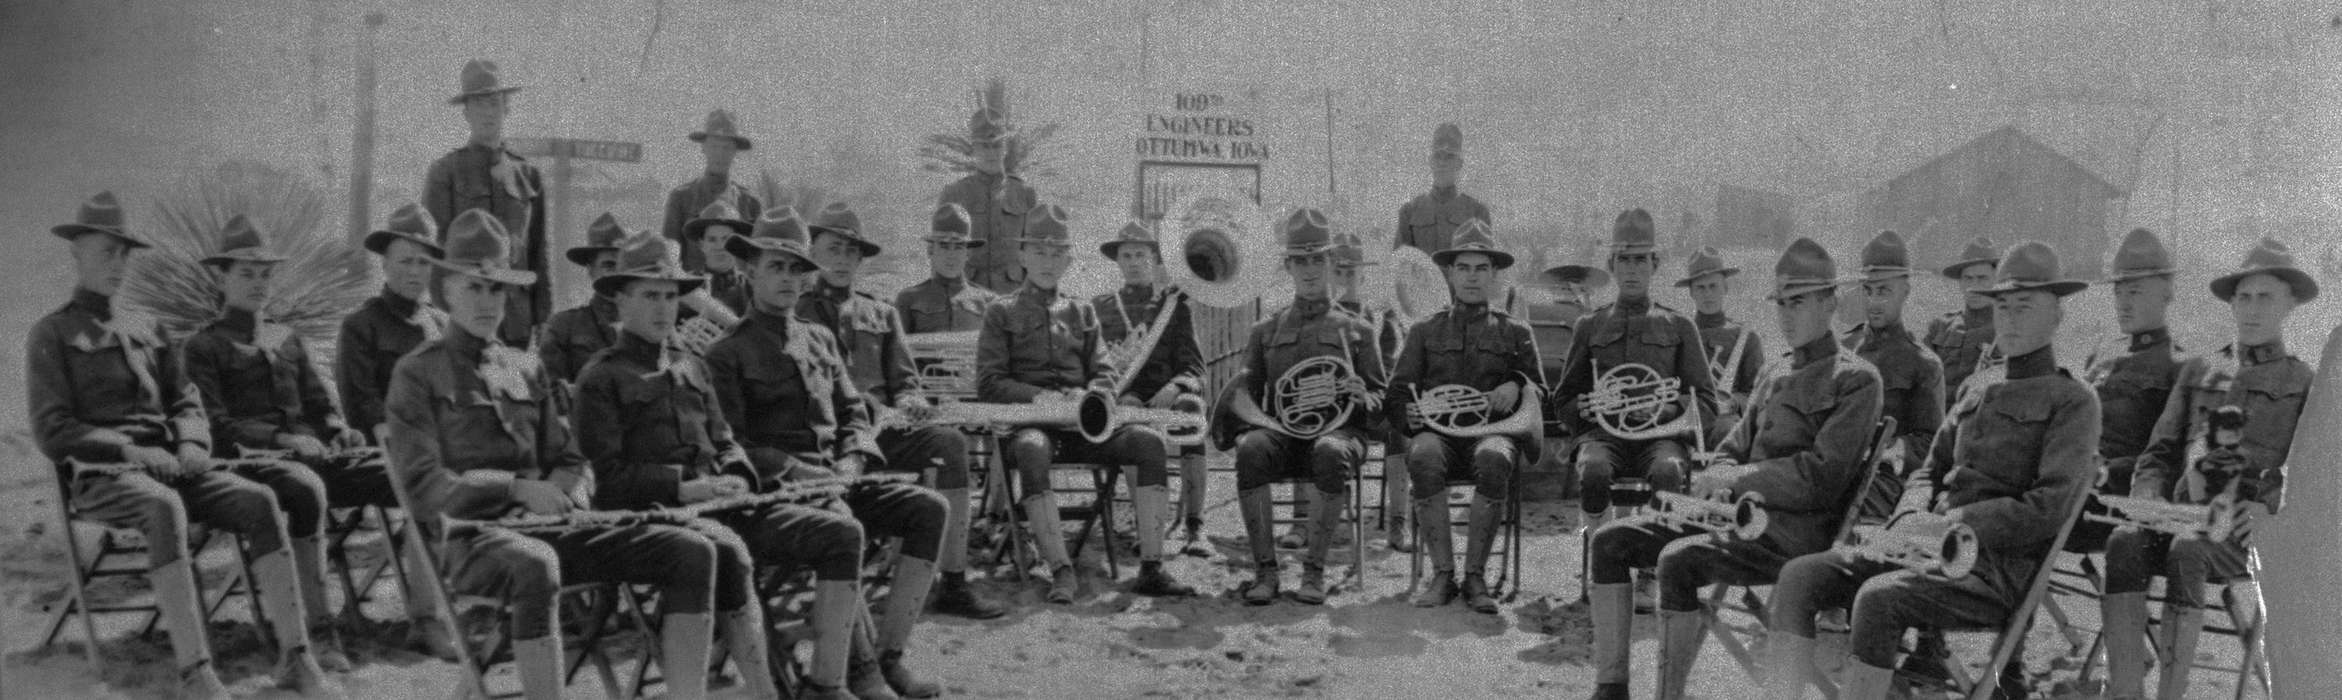 tuba, USA, band, Iowa, Military and Veterans, military, Iowa History, Lemberger, LeAnn, trumpet, french horn, Portraits - Group, flute, history of Iowa